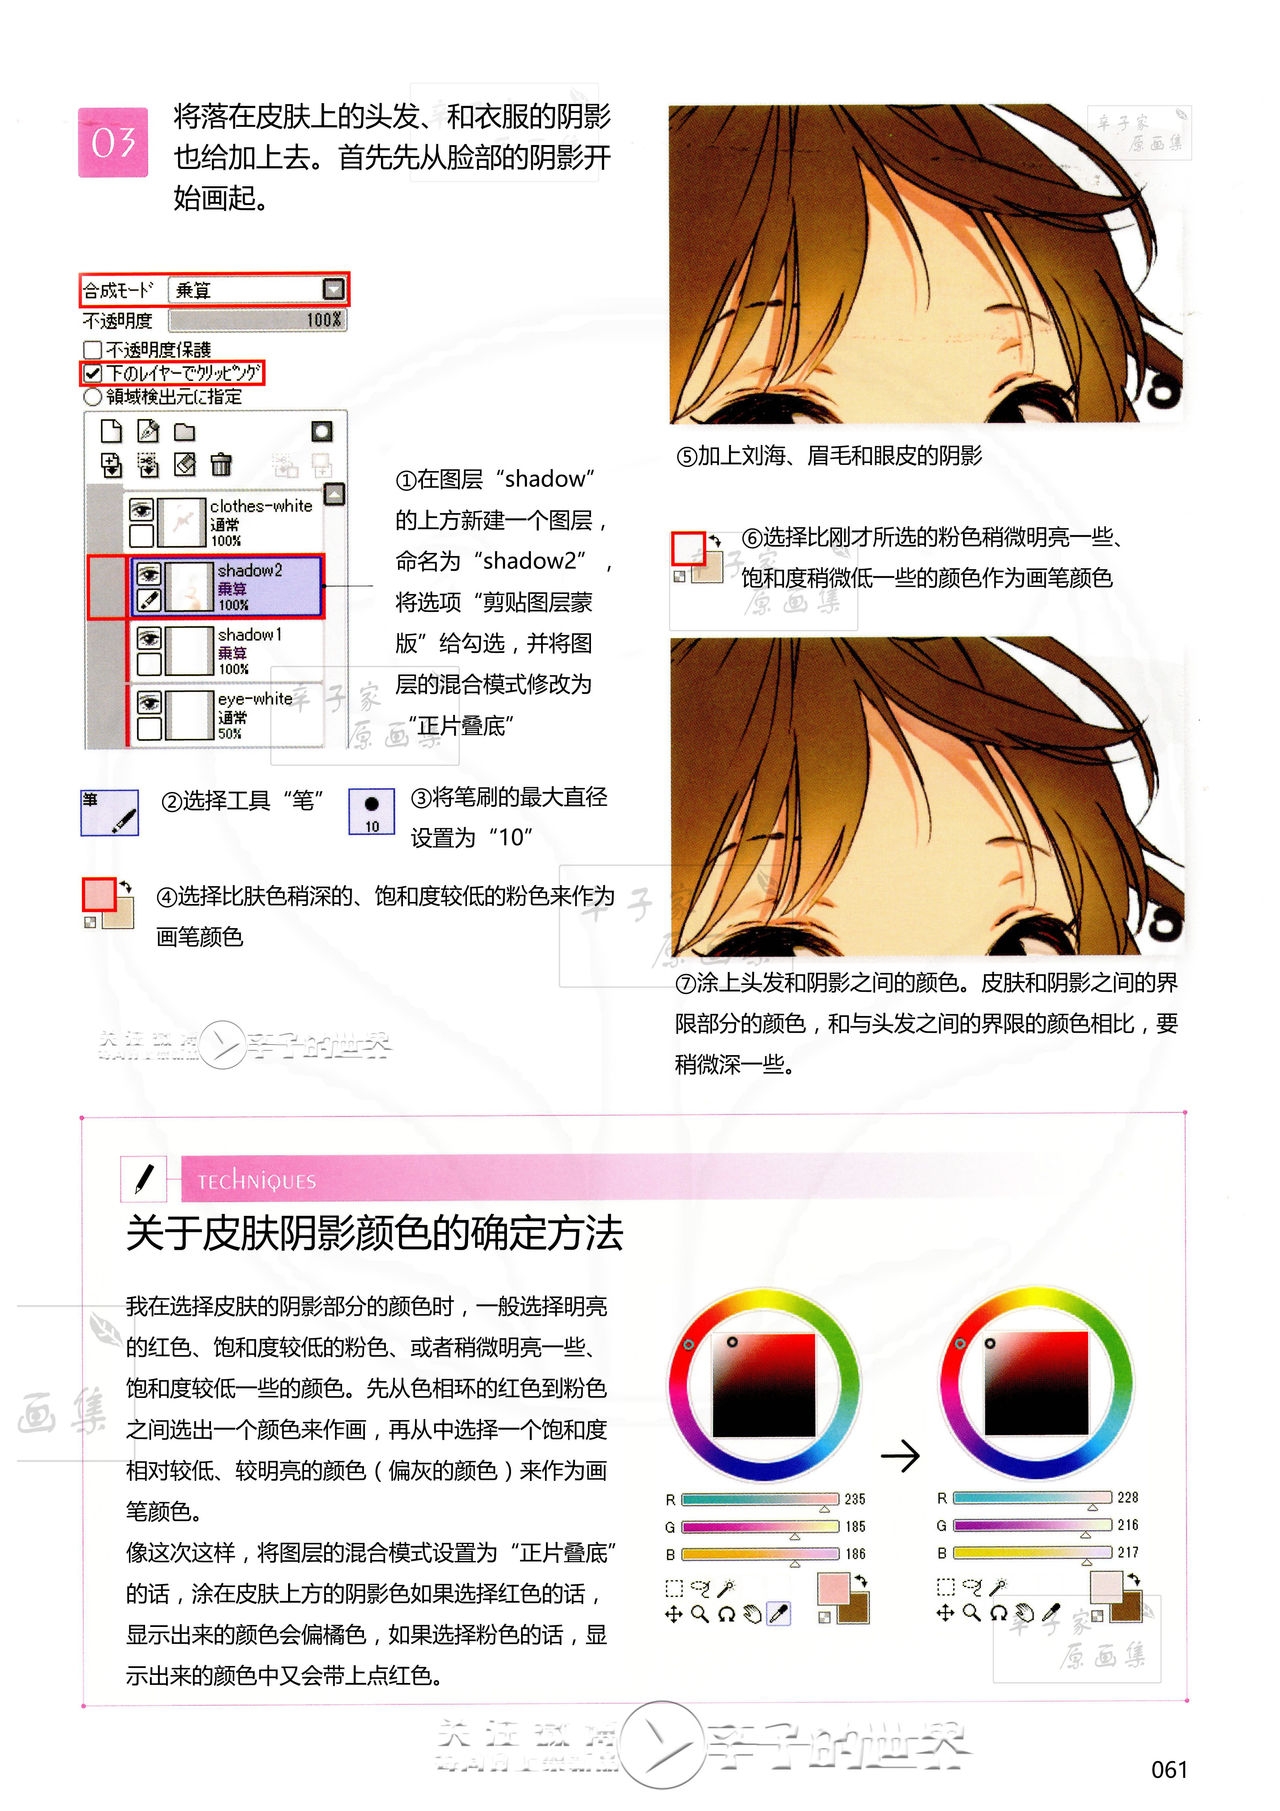 [Anmi] Lets Make ★ Character CG illustration techniques vol.9 [Chinese] 59